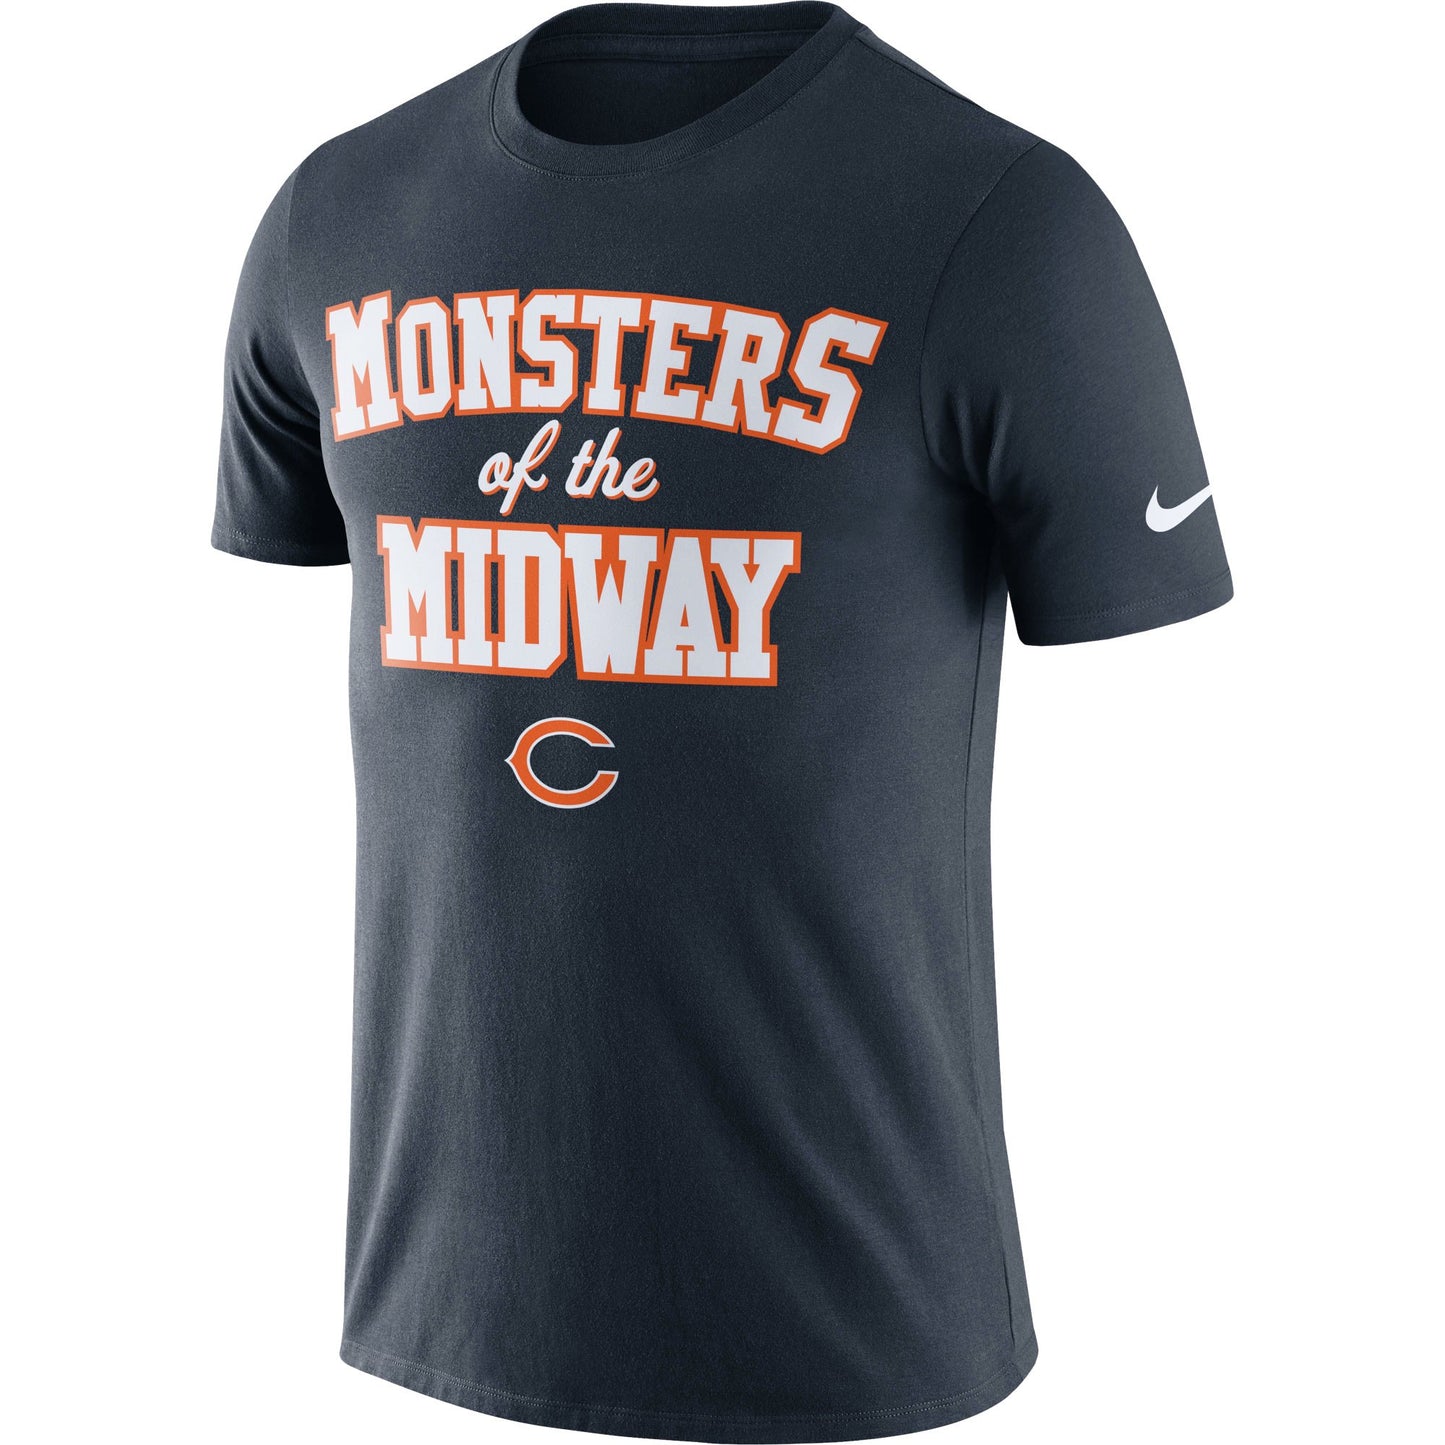 Mens NFL Chicago Bears "Monsters of the Midway" Nike Local Lockup Performance T-Shirt - Navy